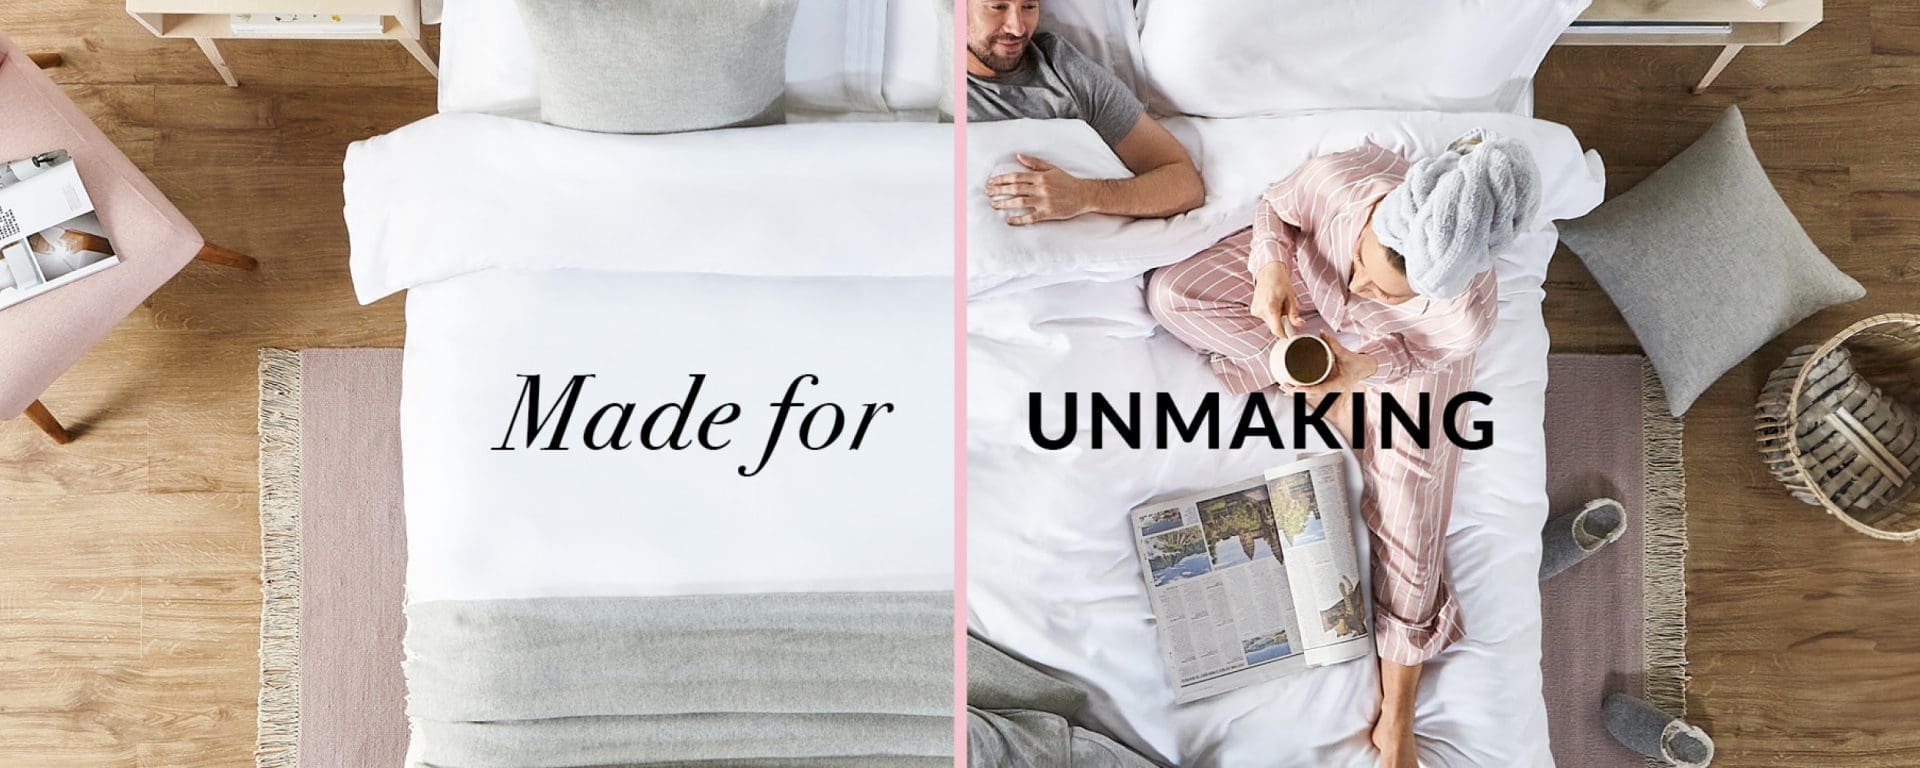 DUSK "Made for Unmaking" Advert screenshot - couple in bed